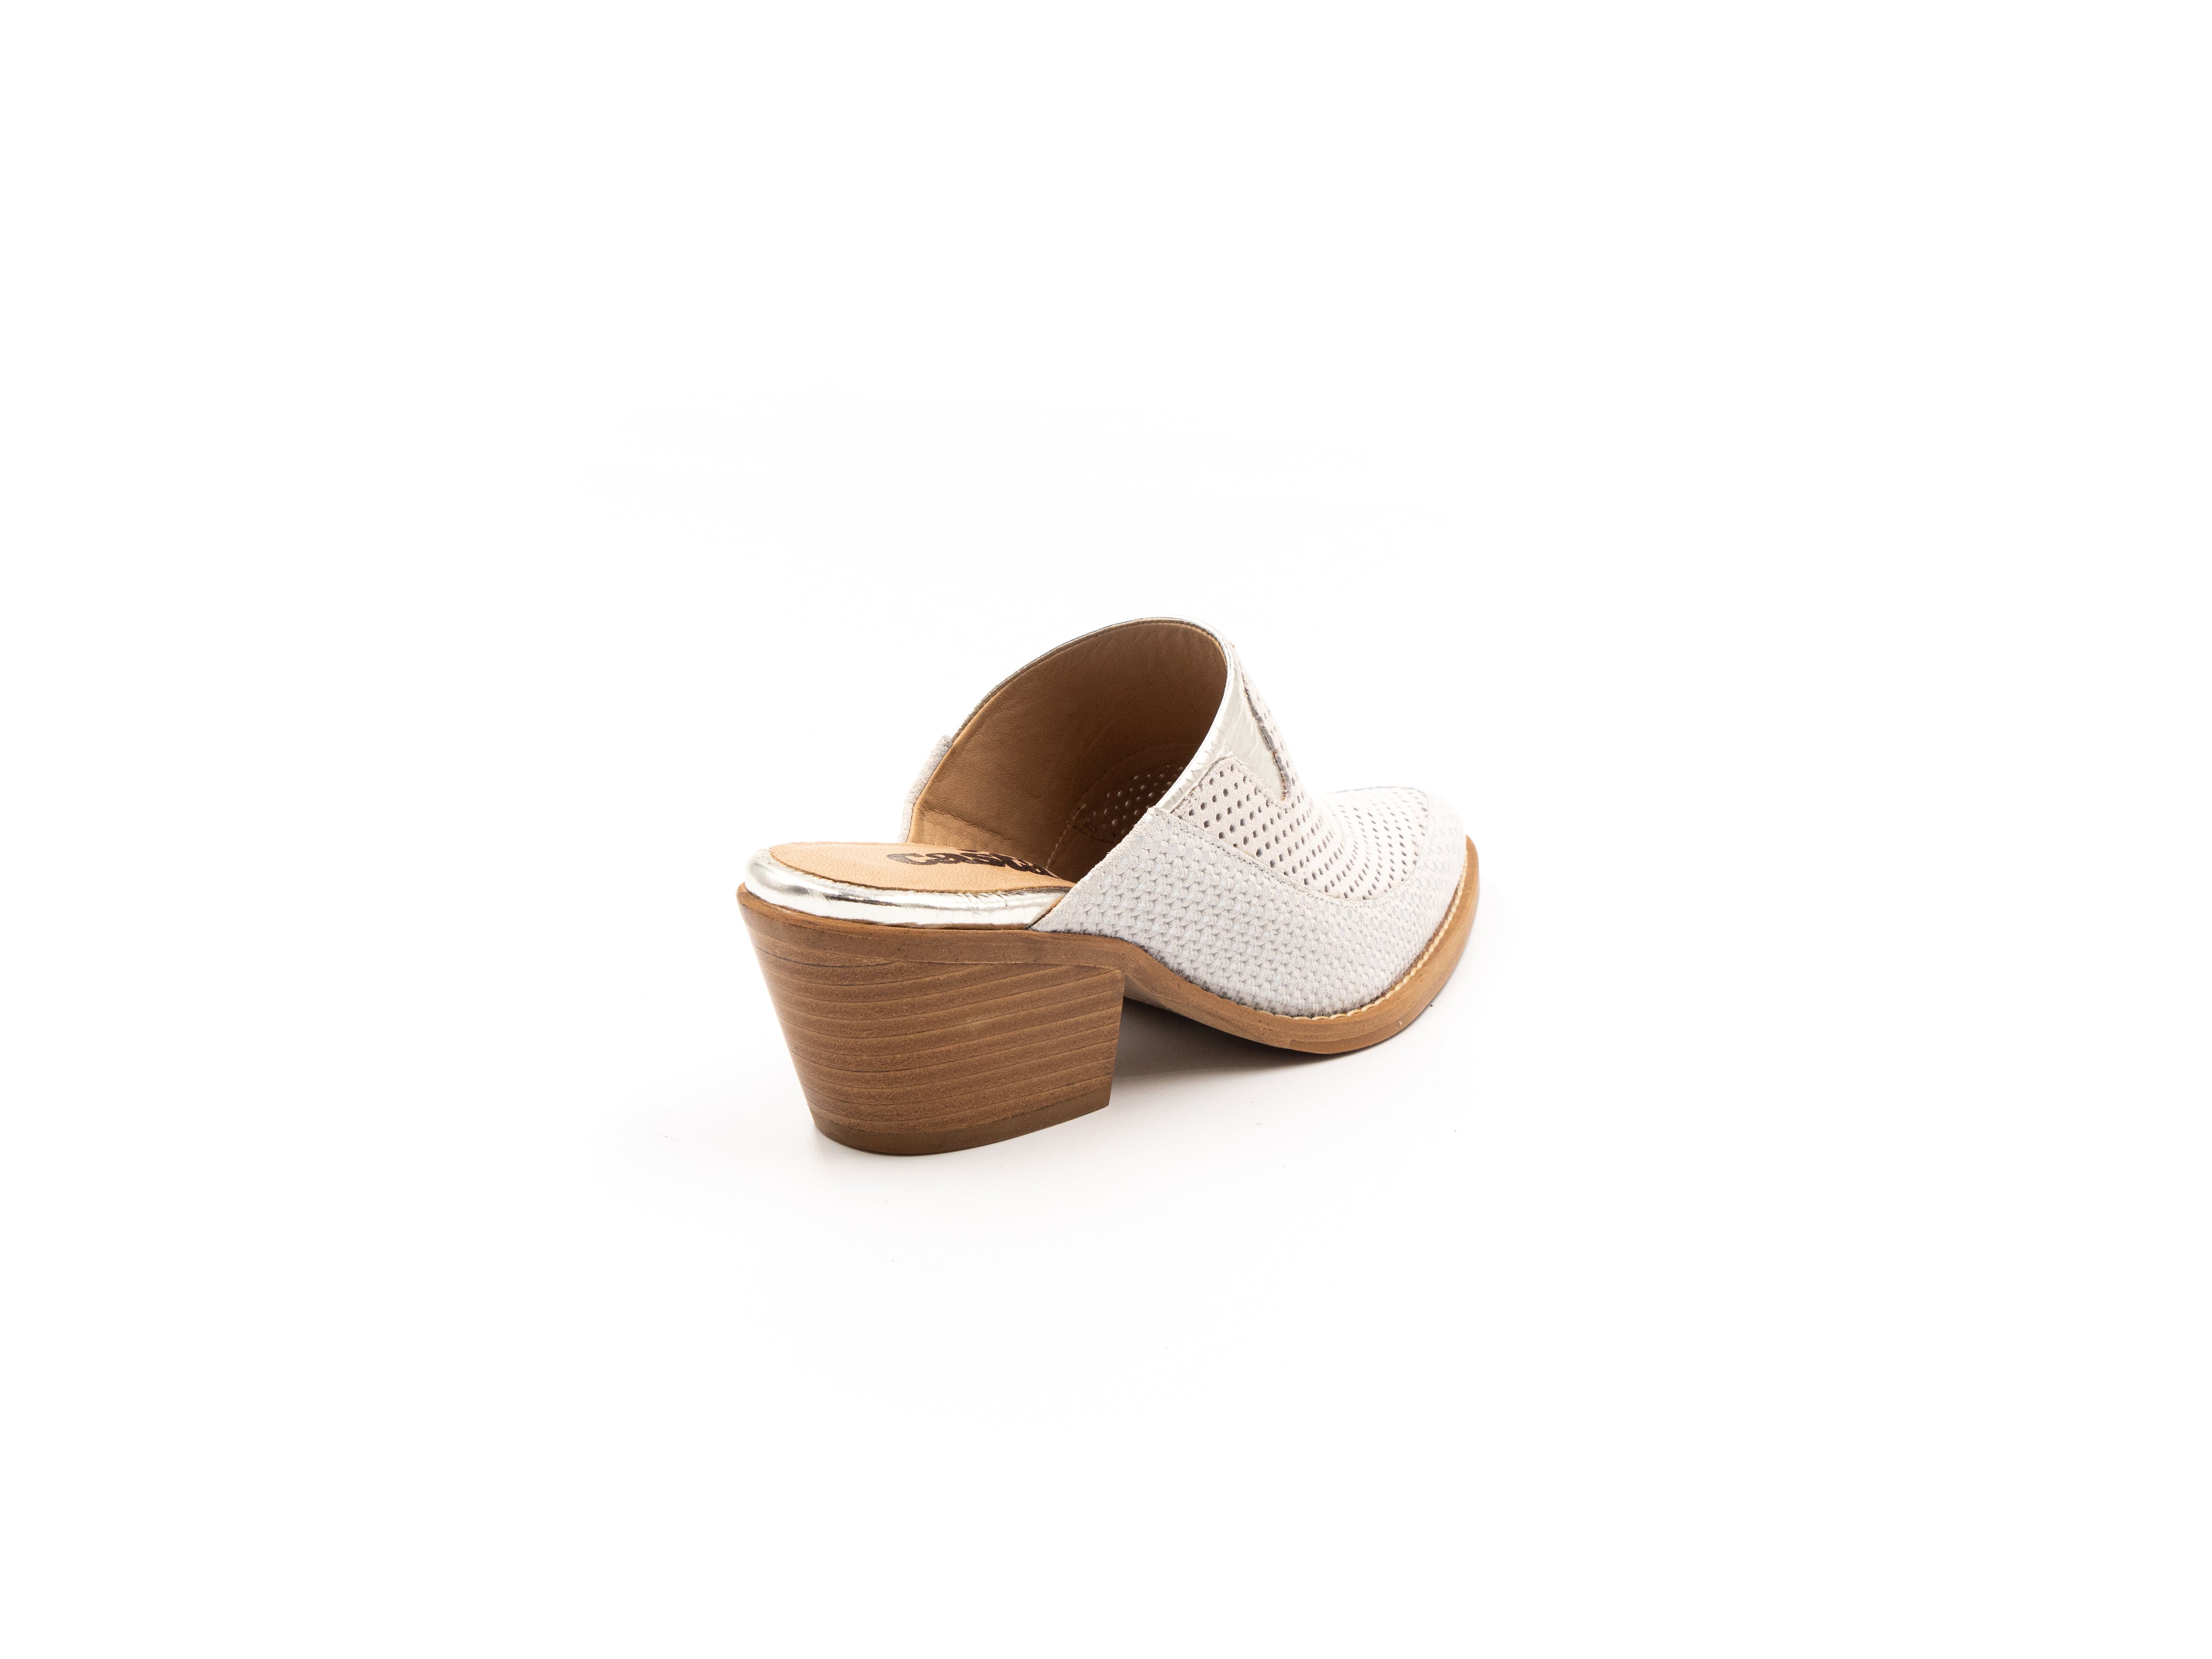 Perforated mules in white.